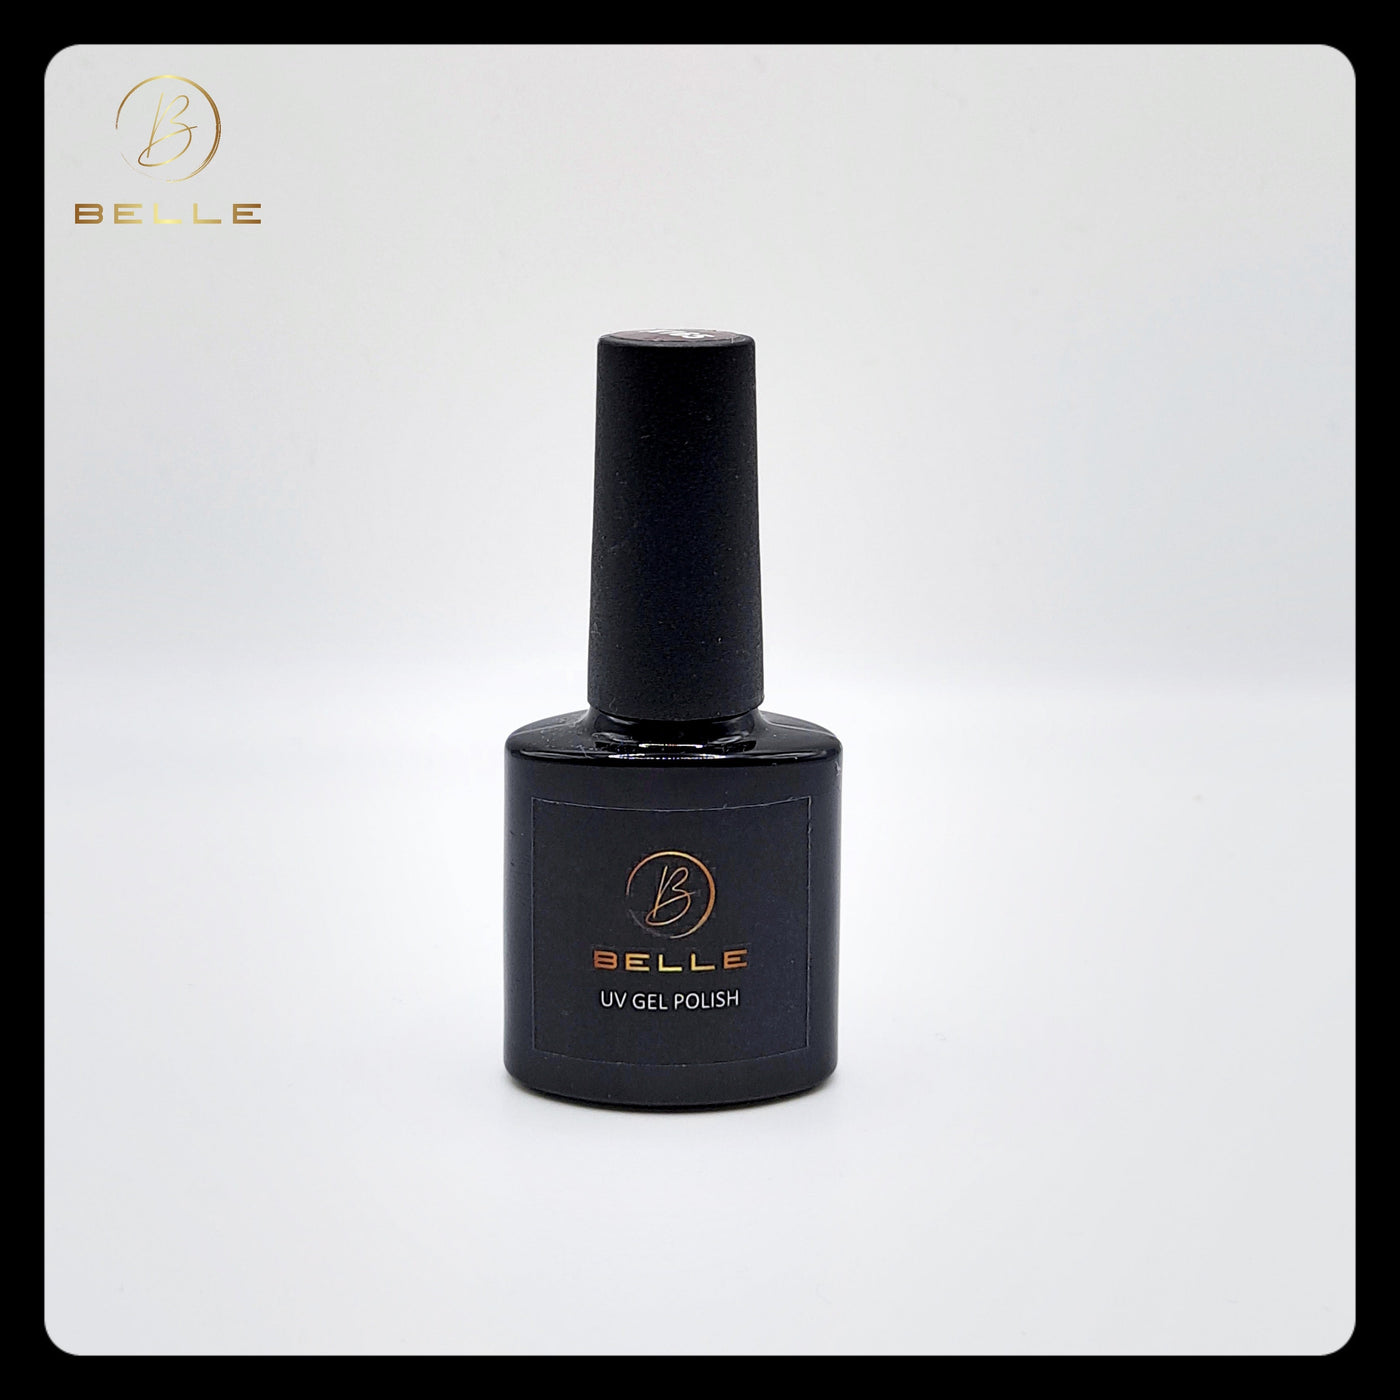 Belle Beauty gel polish container